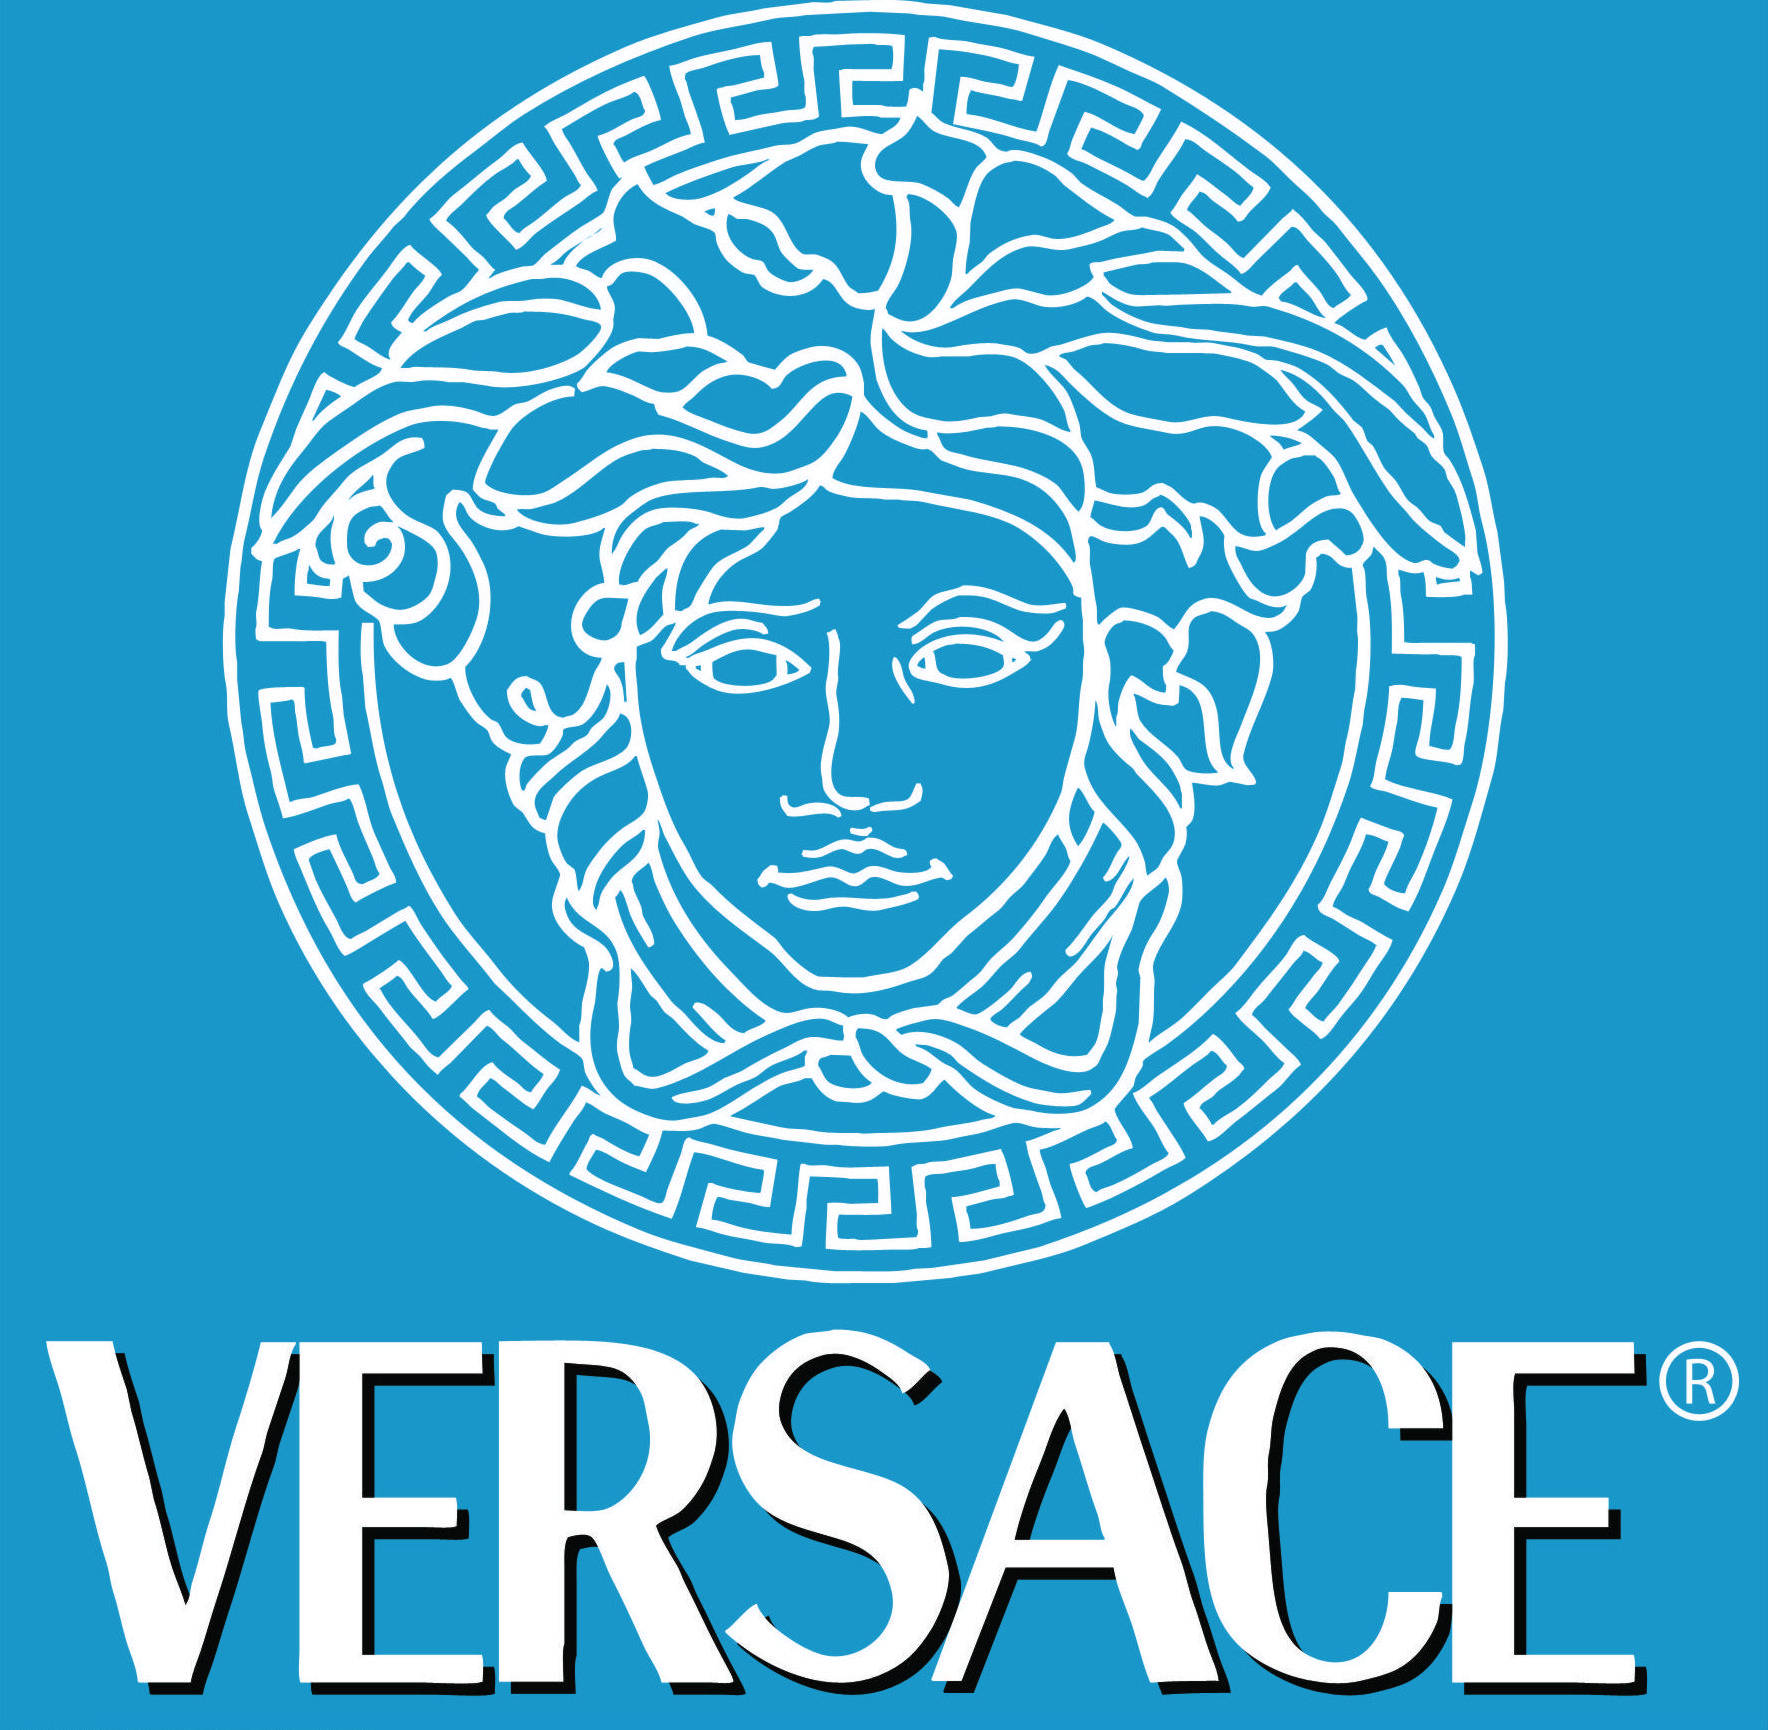 Download Versace Logo On A Blue Background Wallpaper | Wallpapers.com